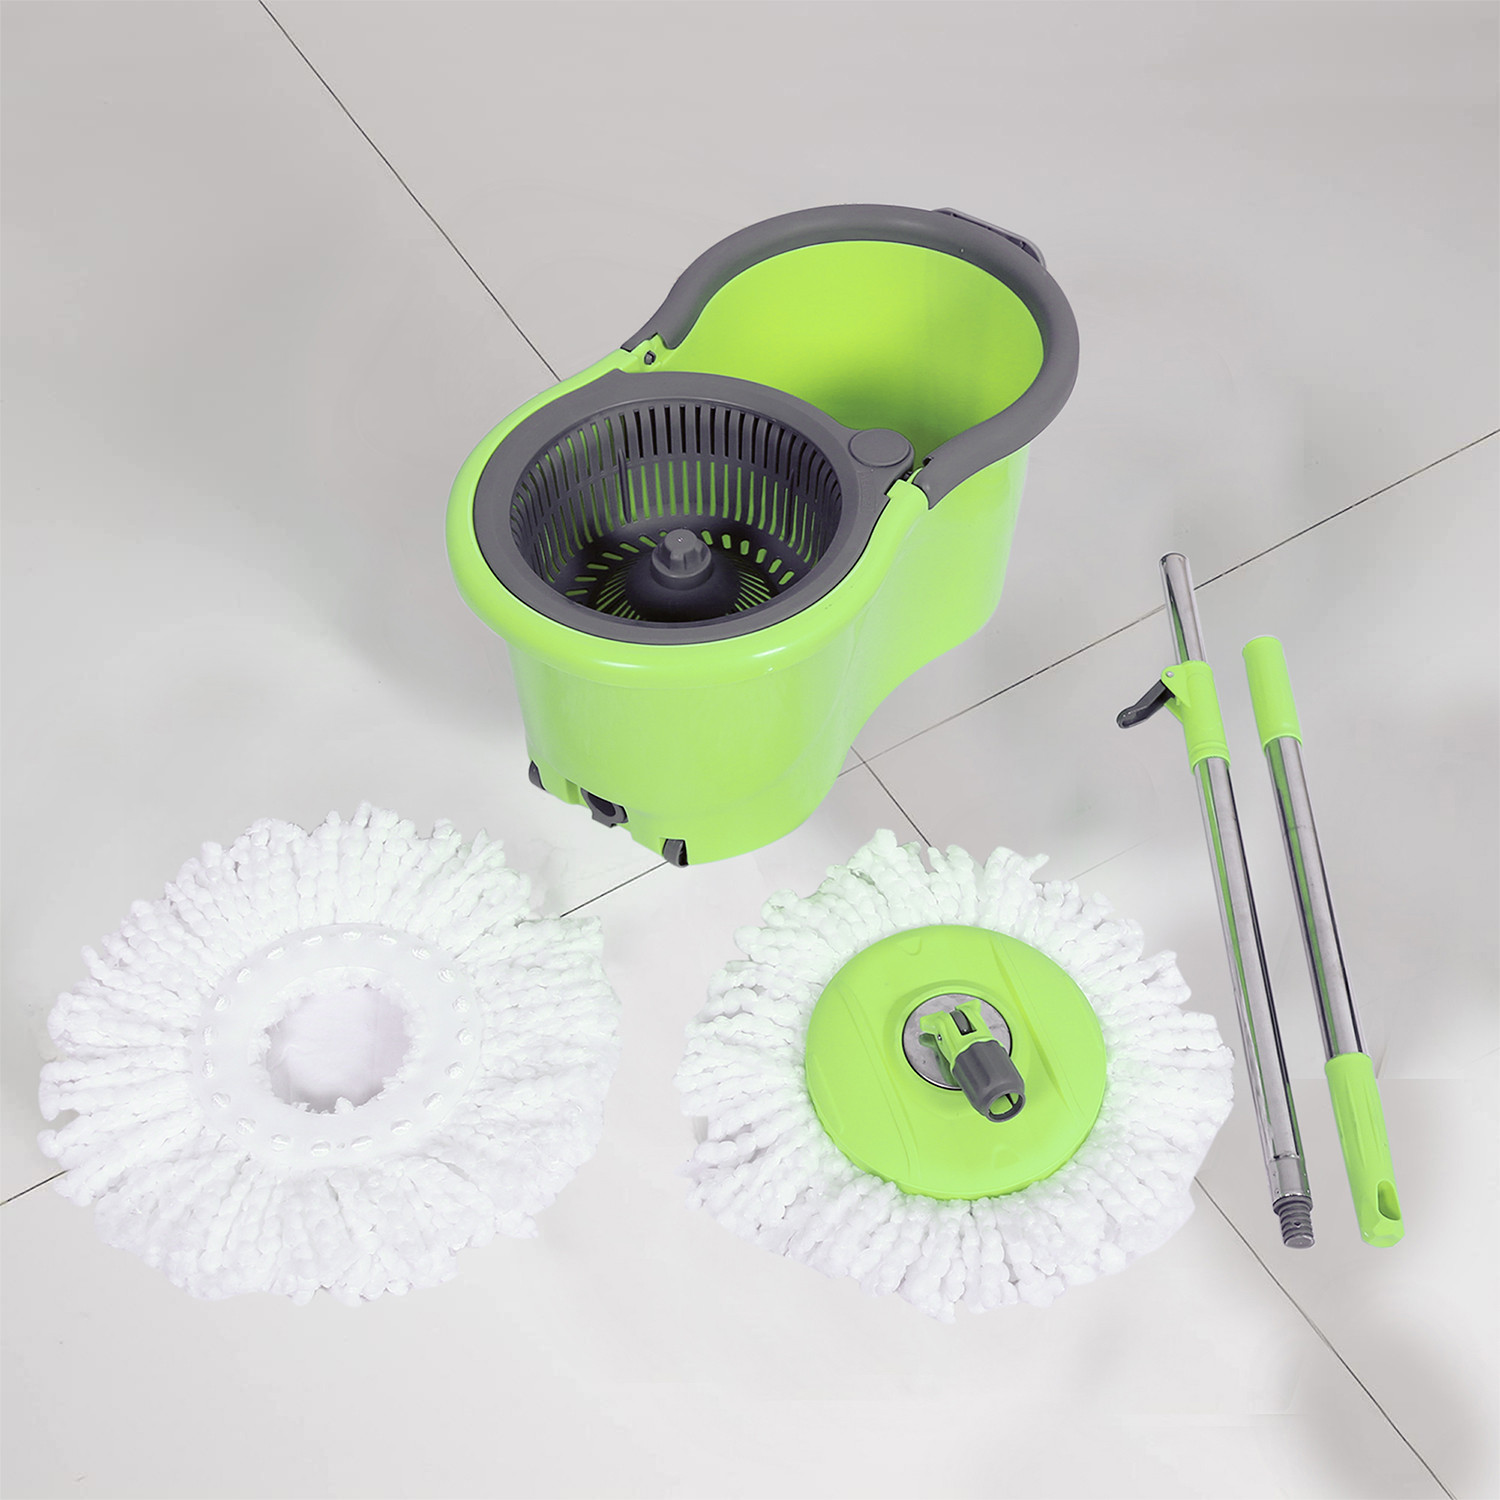 Kuber Industries Plastic Adjustable Mopping Set & 2 Microfiber Head Refill With Wheels Bucket And Auto Fold Handle For Floor Cleaning (Green)